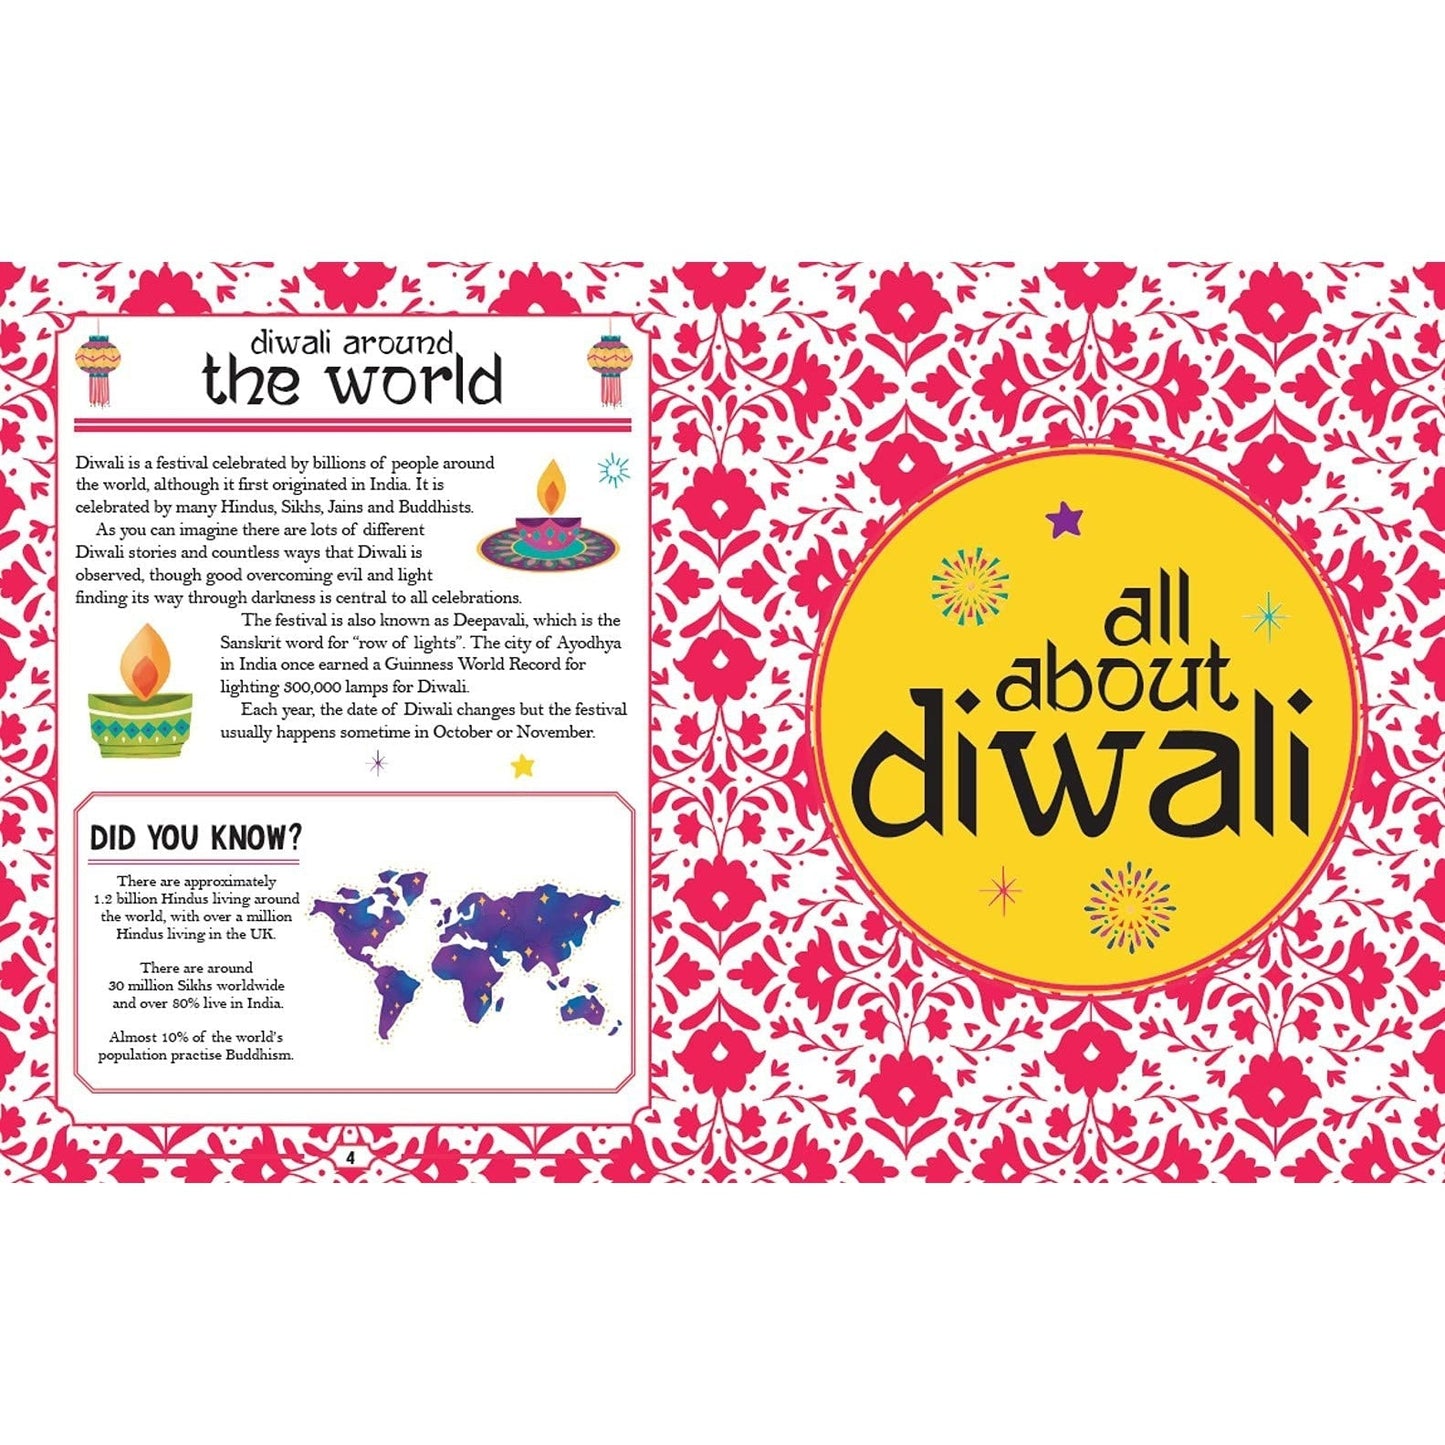 All About Diwali: Things to Make and Do - Swapna Haddow